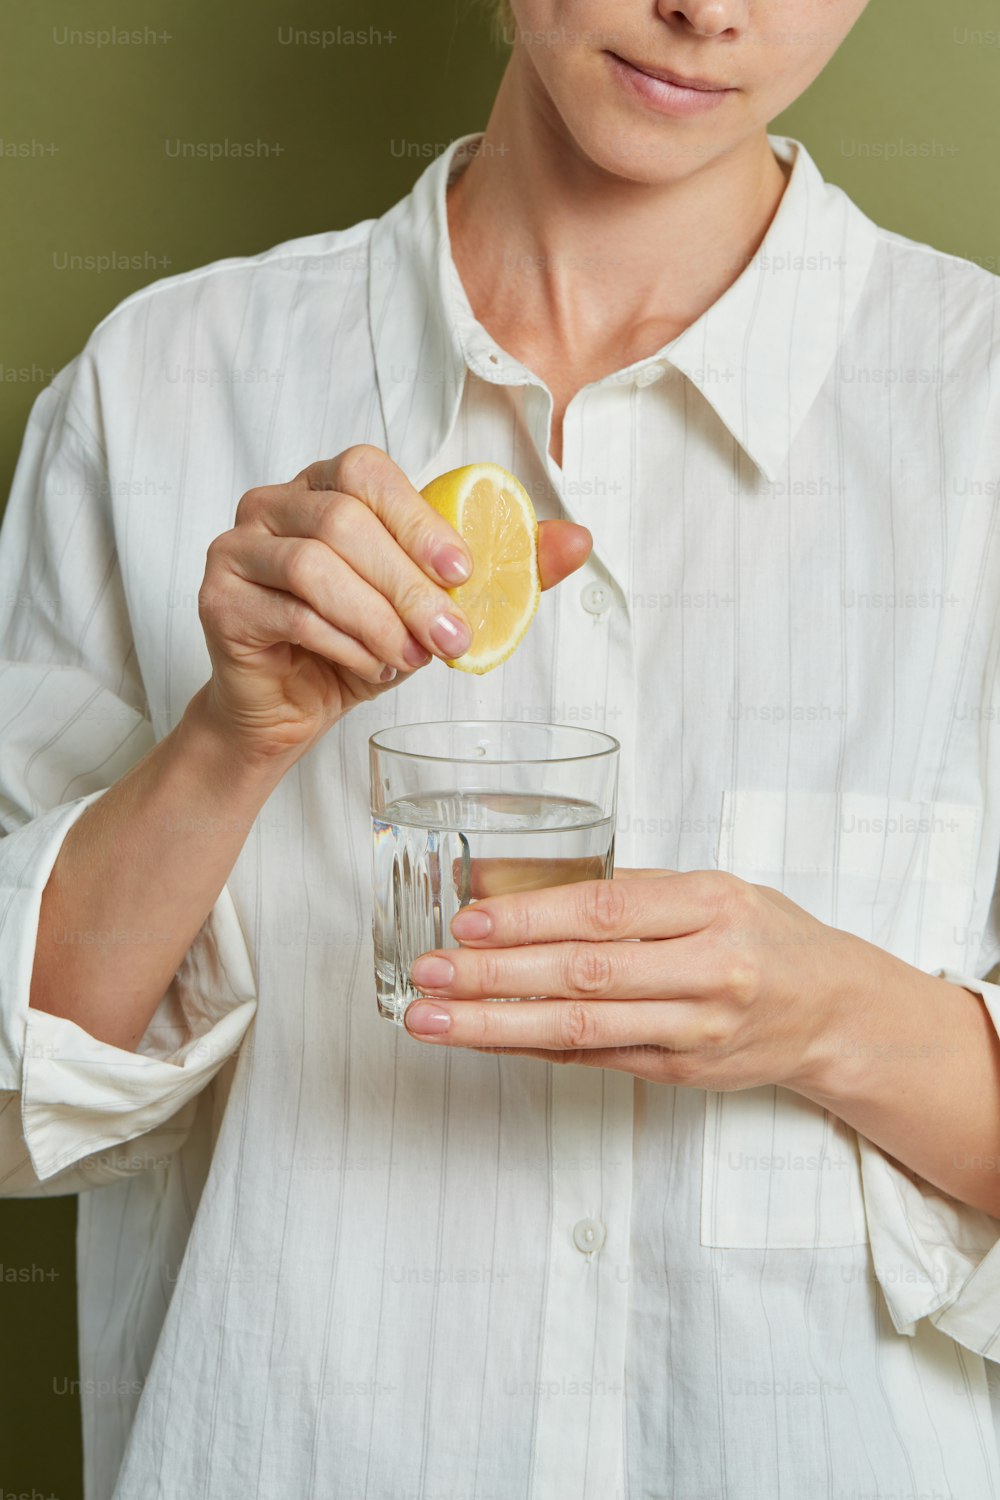 a person holding a lemon and a glass of water